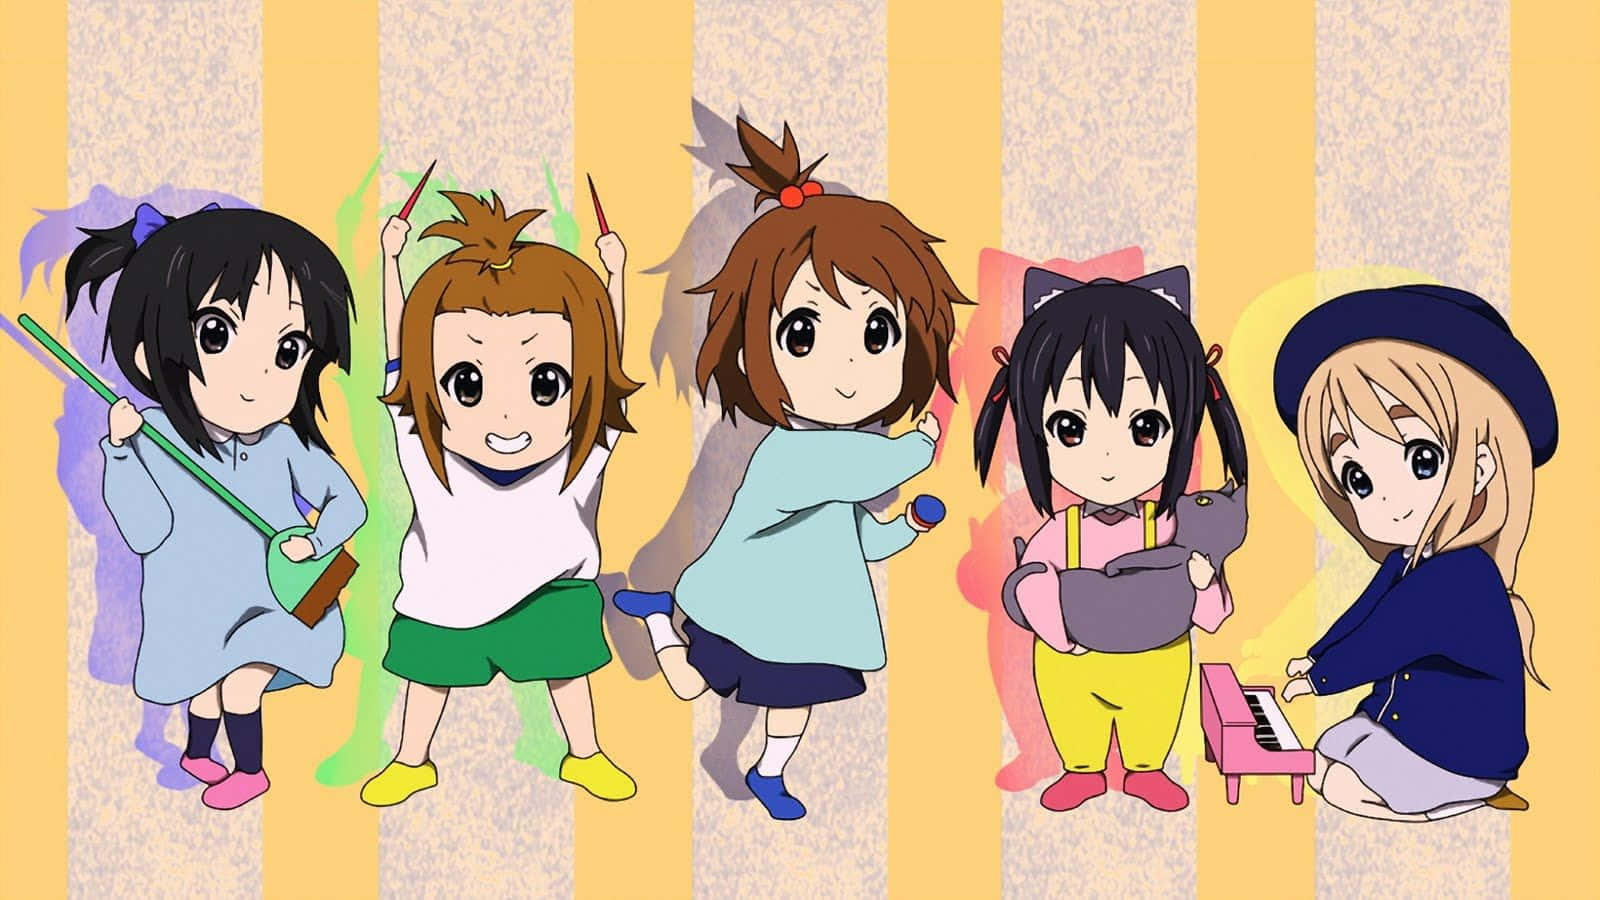 A Group Of Anime Girls Are Standing In A Yellow And White Background